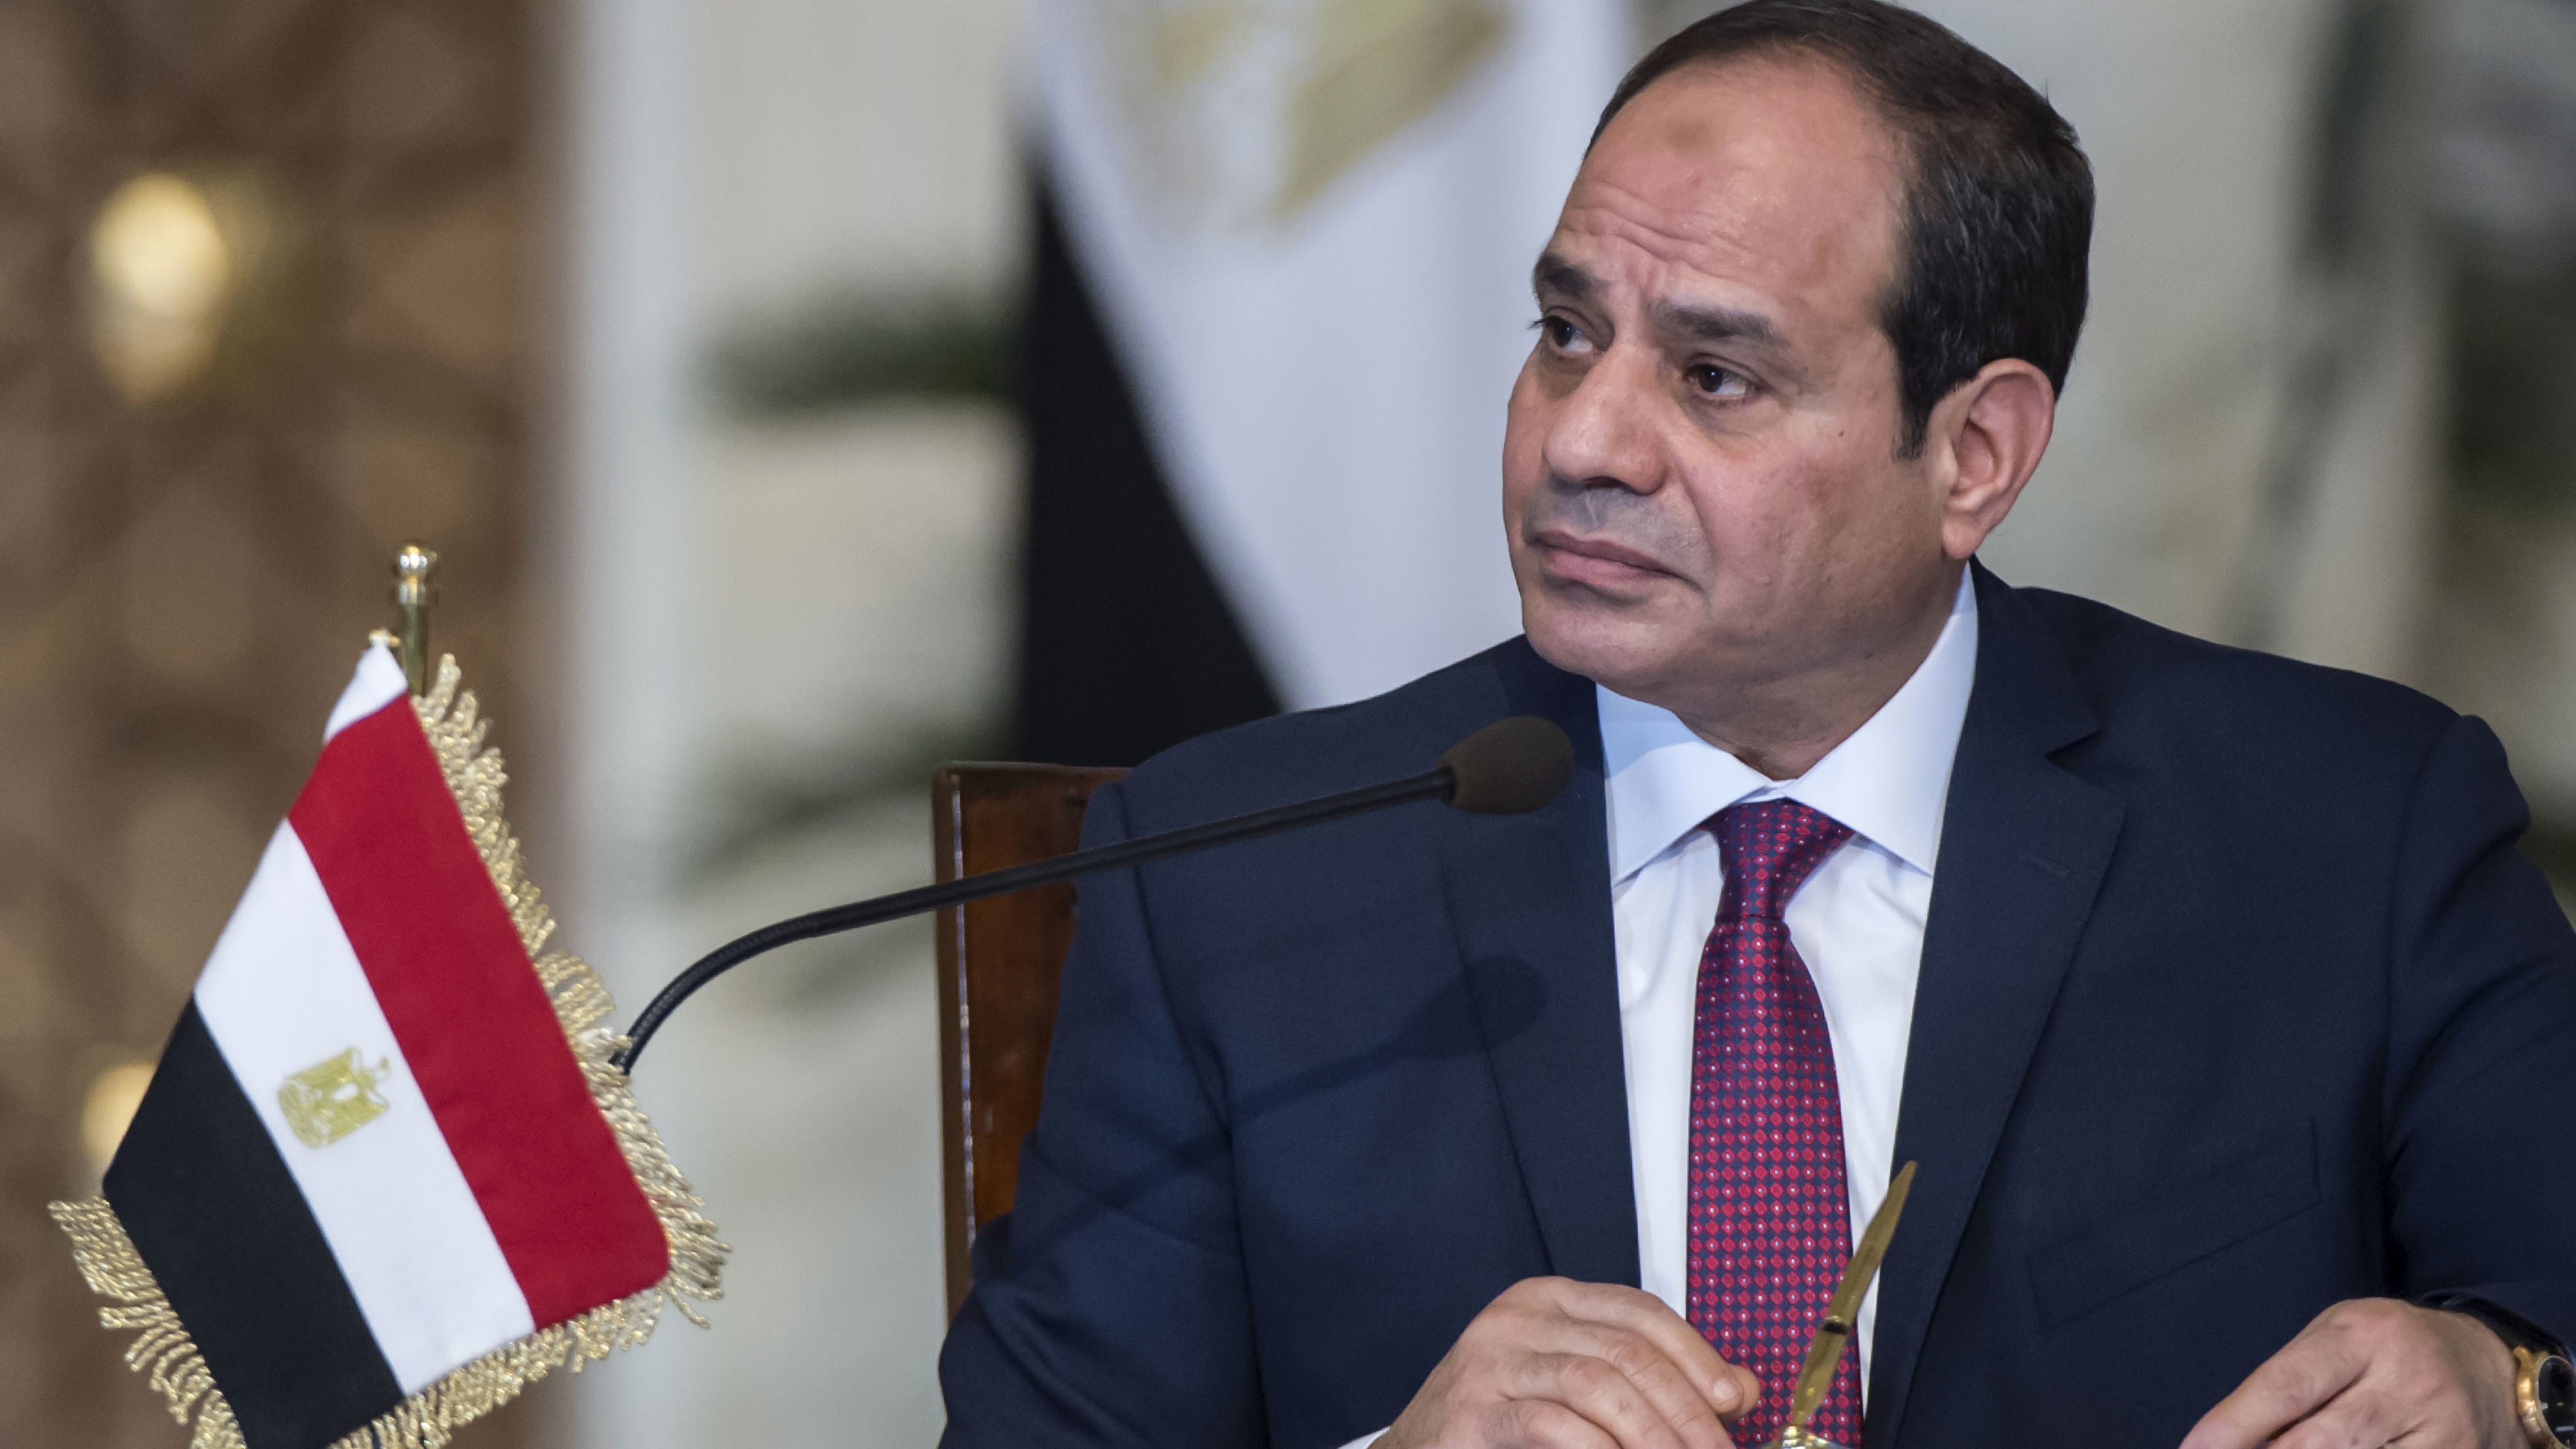 Egyptian President Abdel Fattah el-Sisi at a  press conference in Cairo in December 2017.